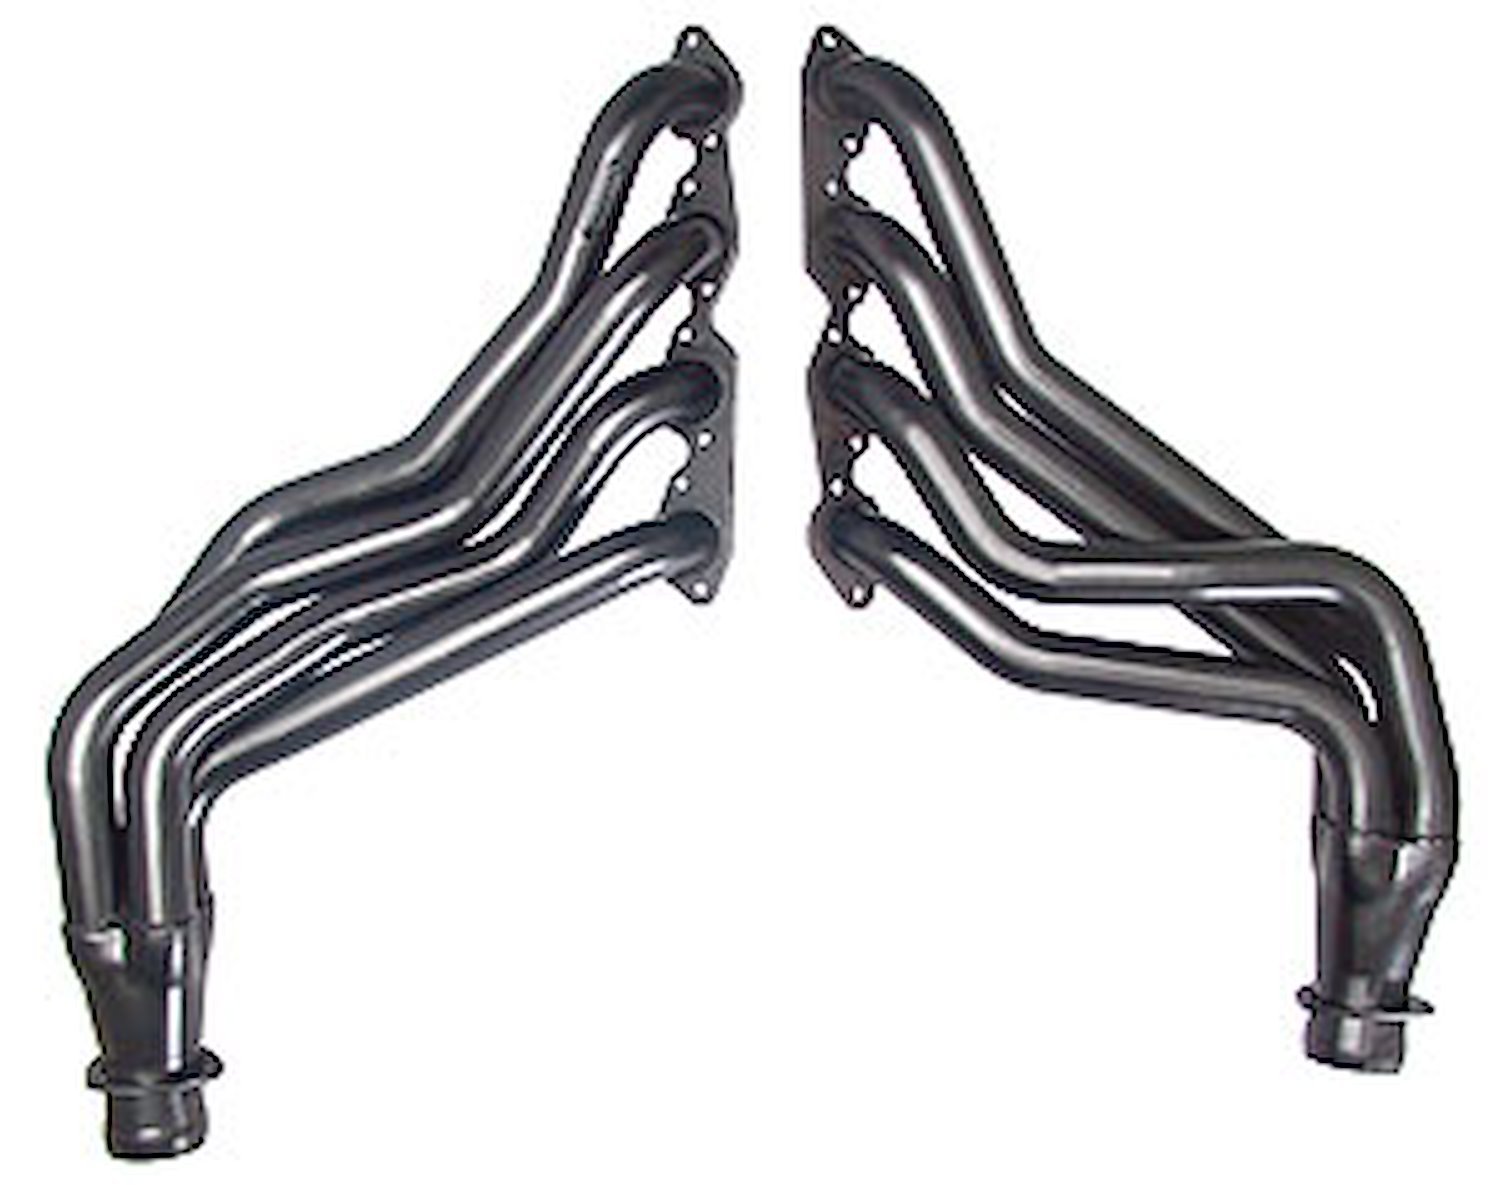 Standard Duty Uncoated Full Length Headers for 1967-91 Chevy/GMC Blazer, Jimmy, Suburban 2WD